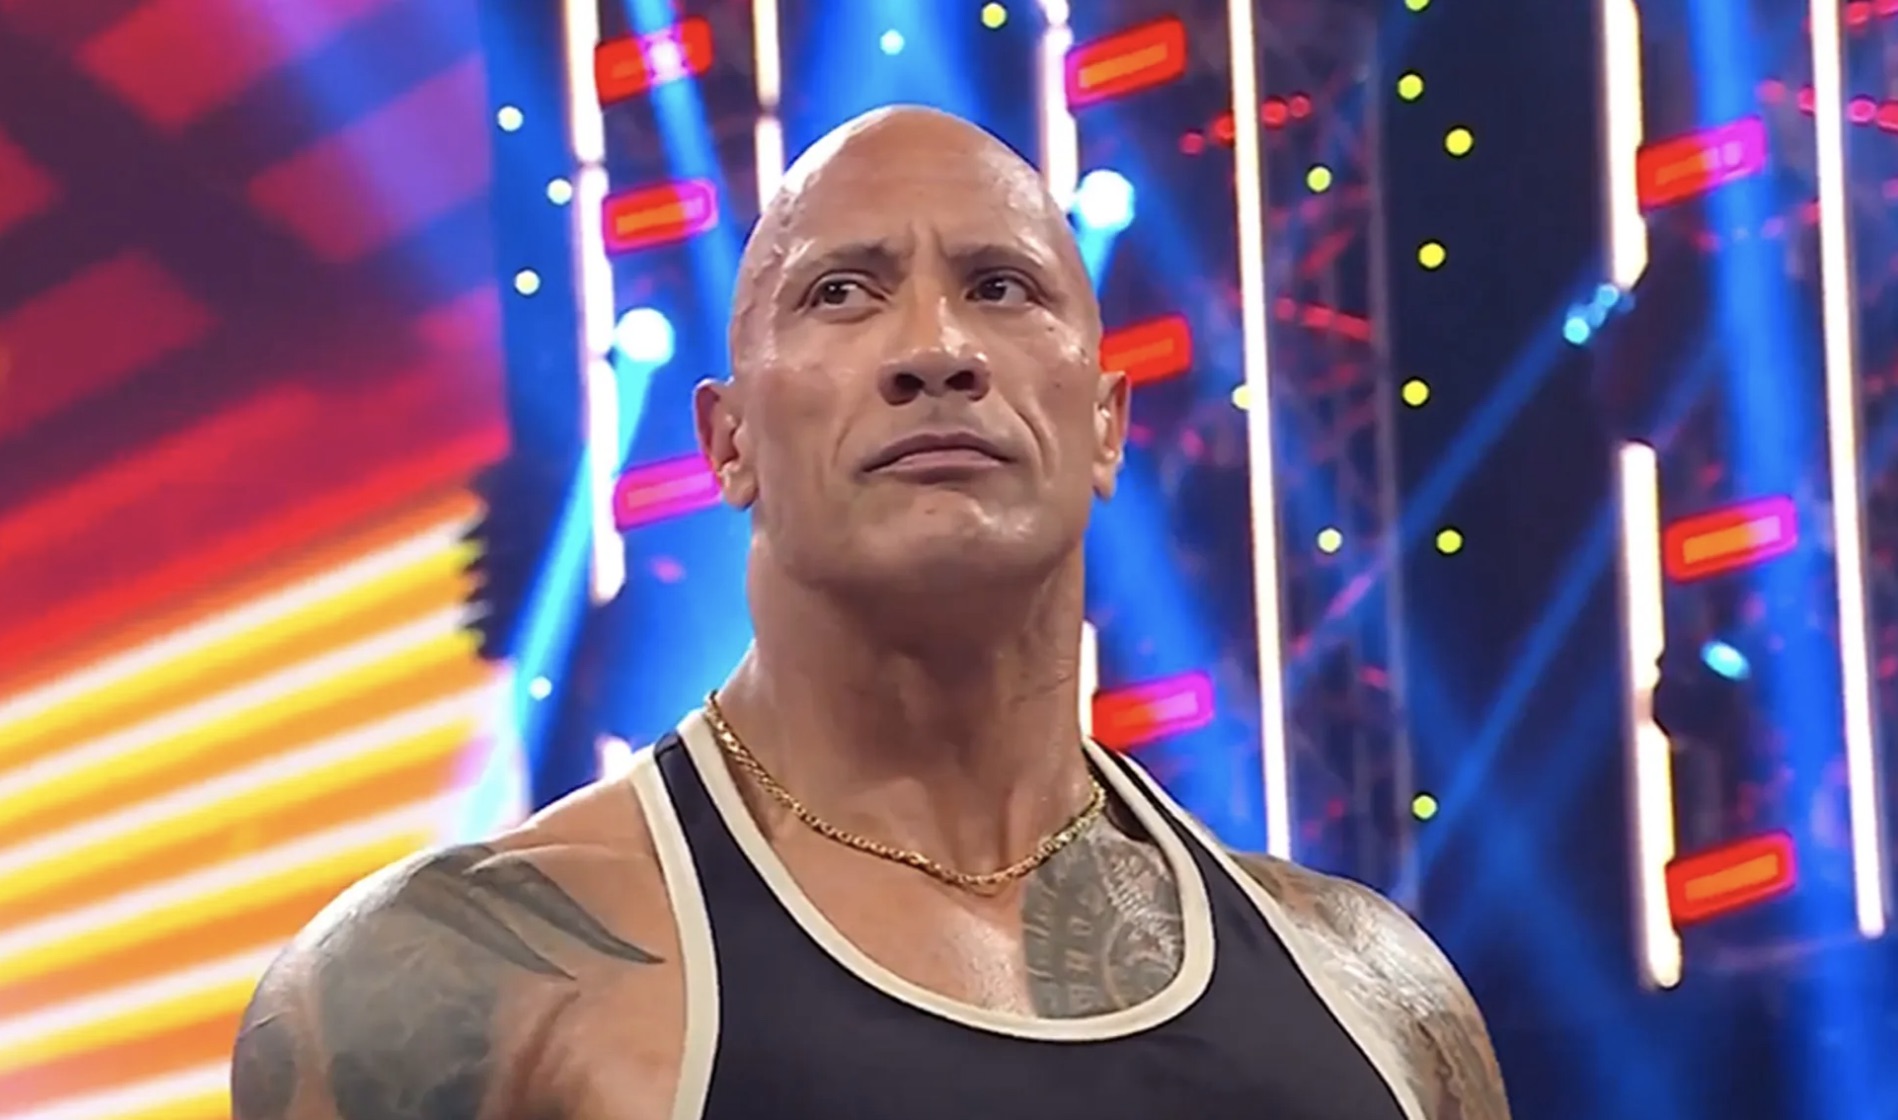 Dwayne Johnson Now Owns The Rock’s Trademark Catchphrases ‘Jabroni,’ ‘Roody Poo,’ ‘Candy A**,’ ‘The People’s Champion,’ & More